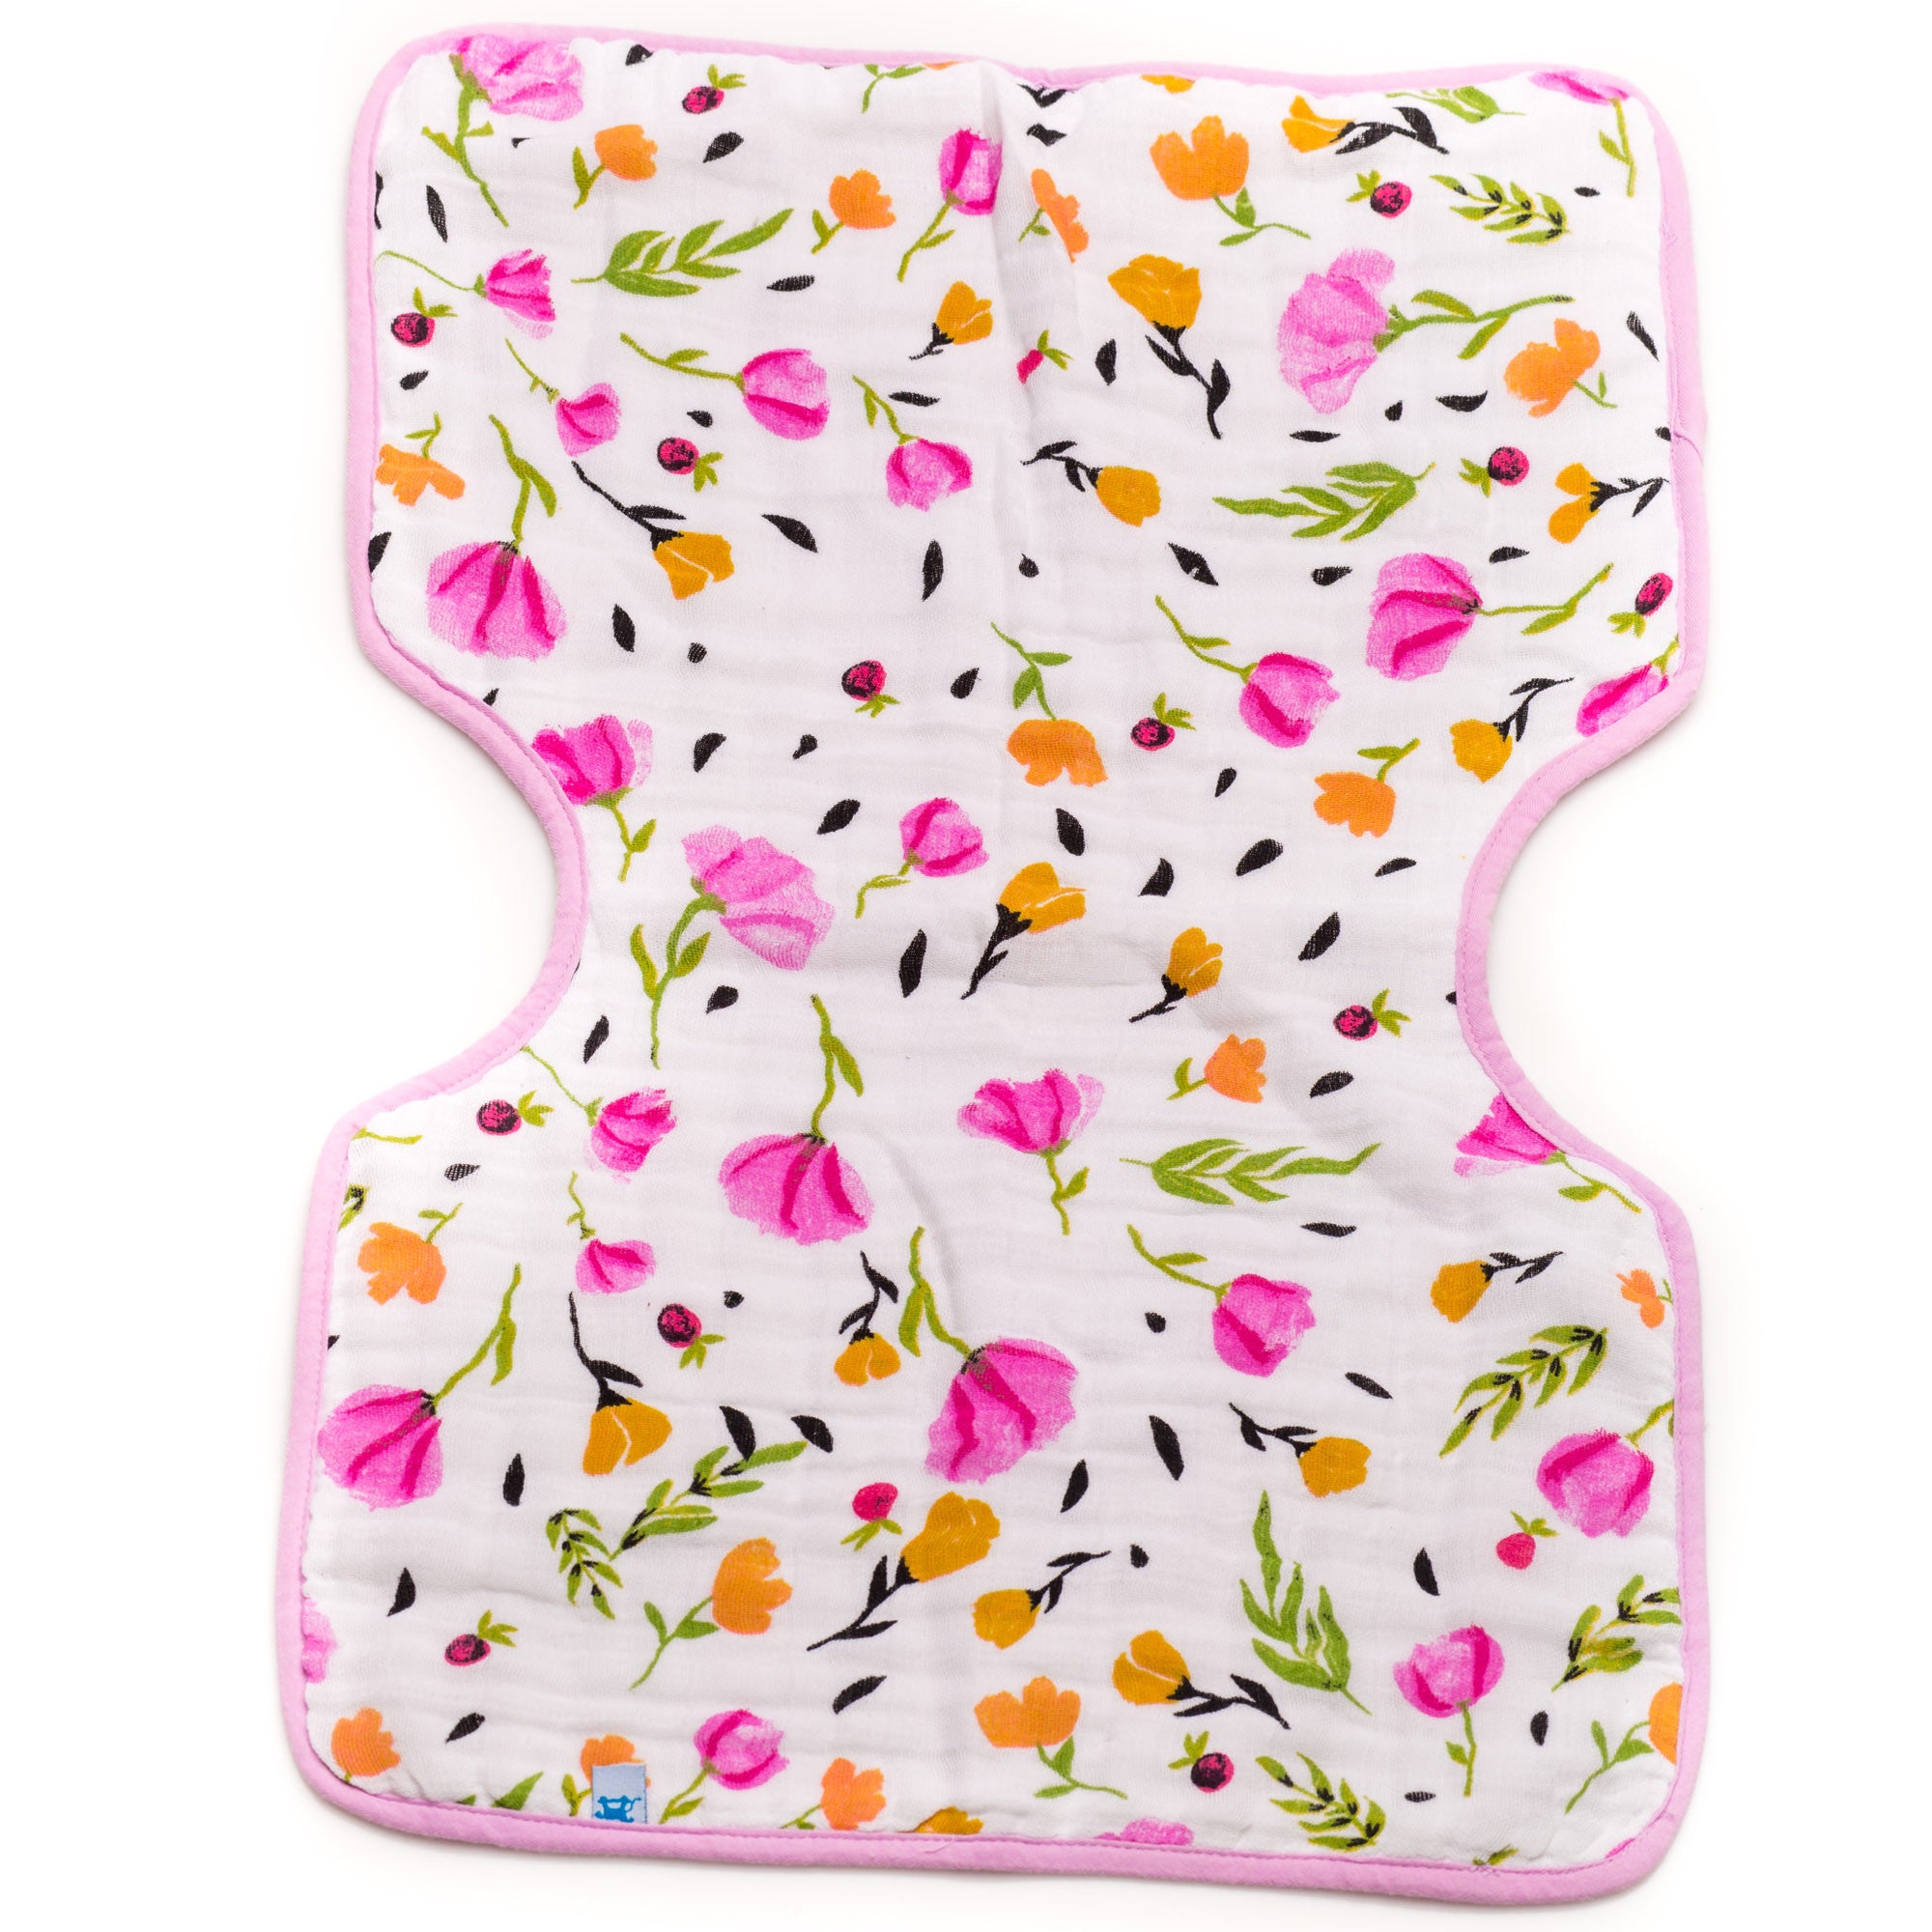 Soft Burp Cloth by Little Unicorn at Bonjour Baby Baskets